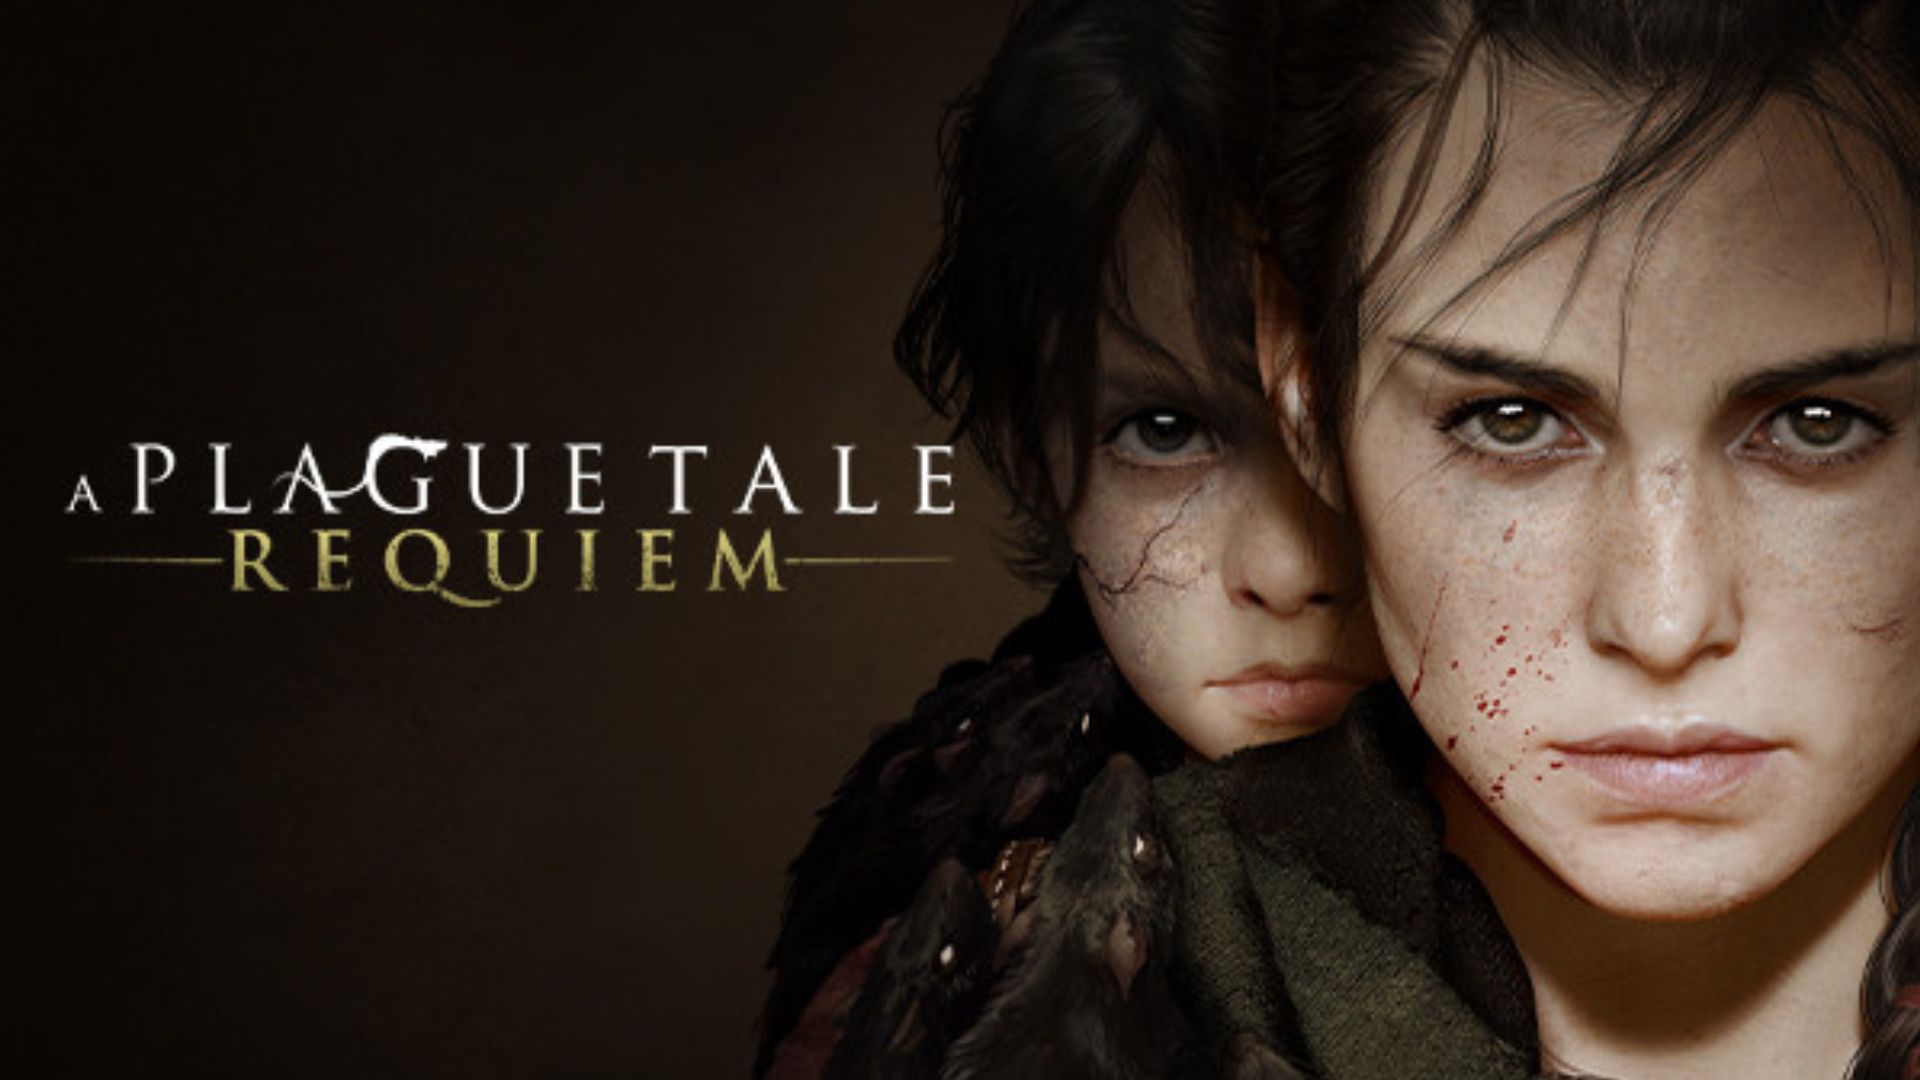 Leak Claims That A Plague Tale Requiem May Be Capped At 30 FPS